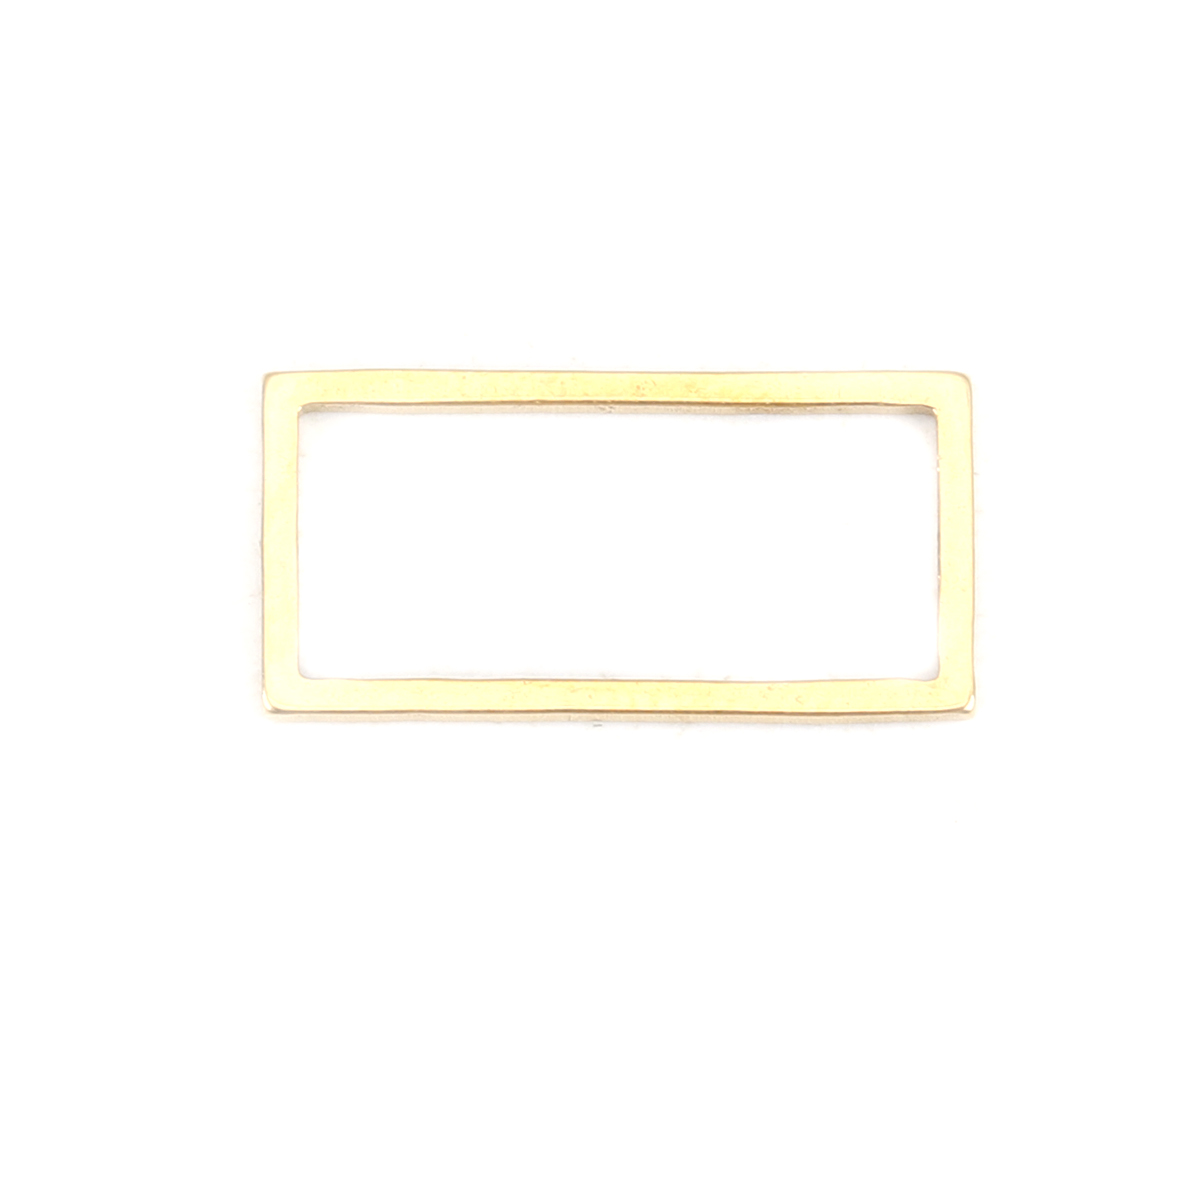 Picture of 304 Stainless Steel Frame Connectors Rectangle Gold Plated Hollow 16mm x 8mm, 10 PCs